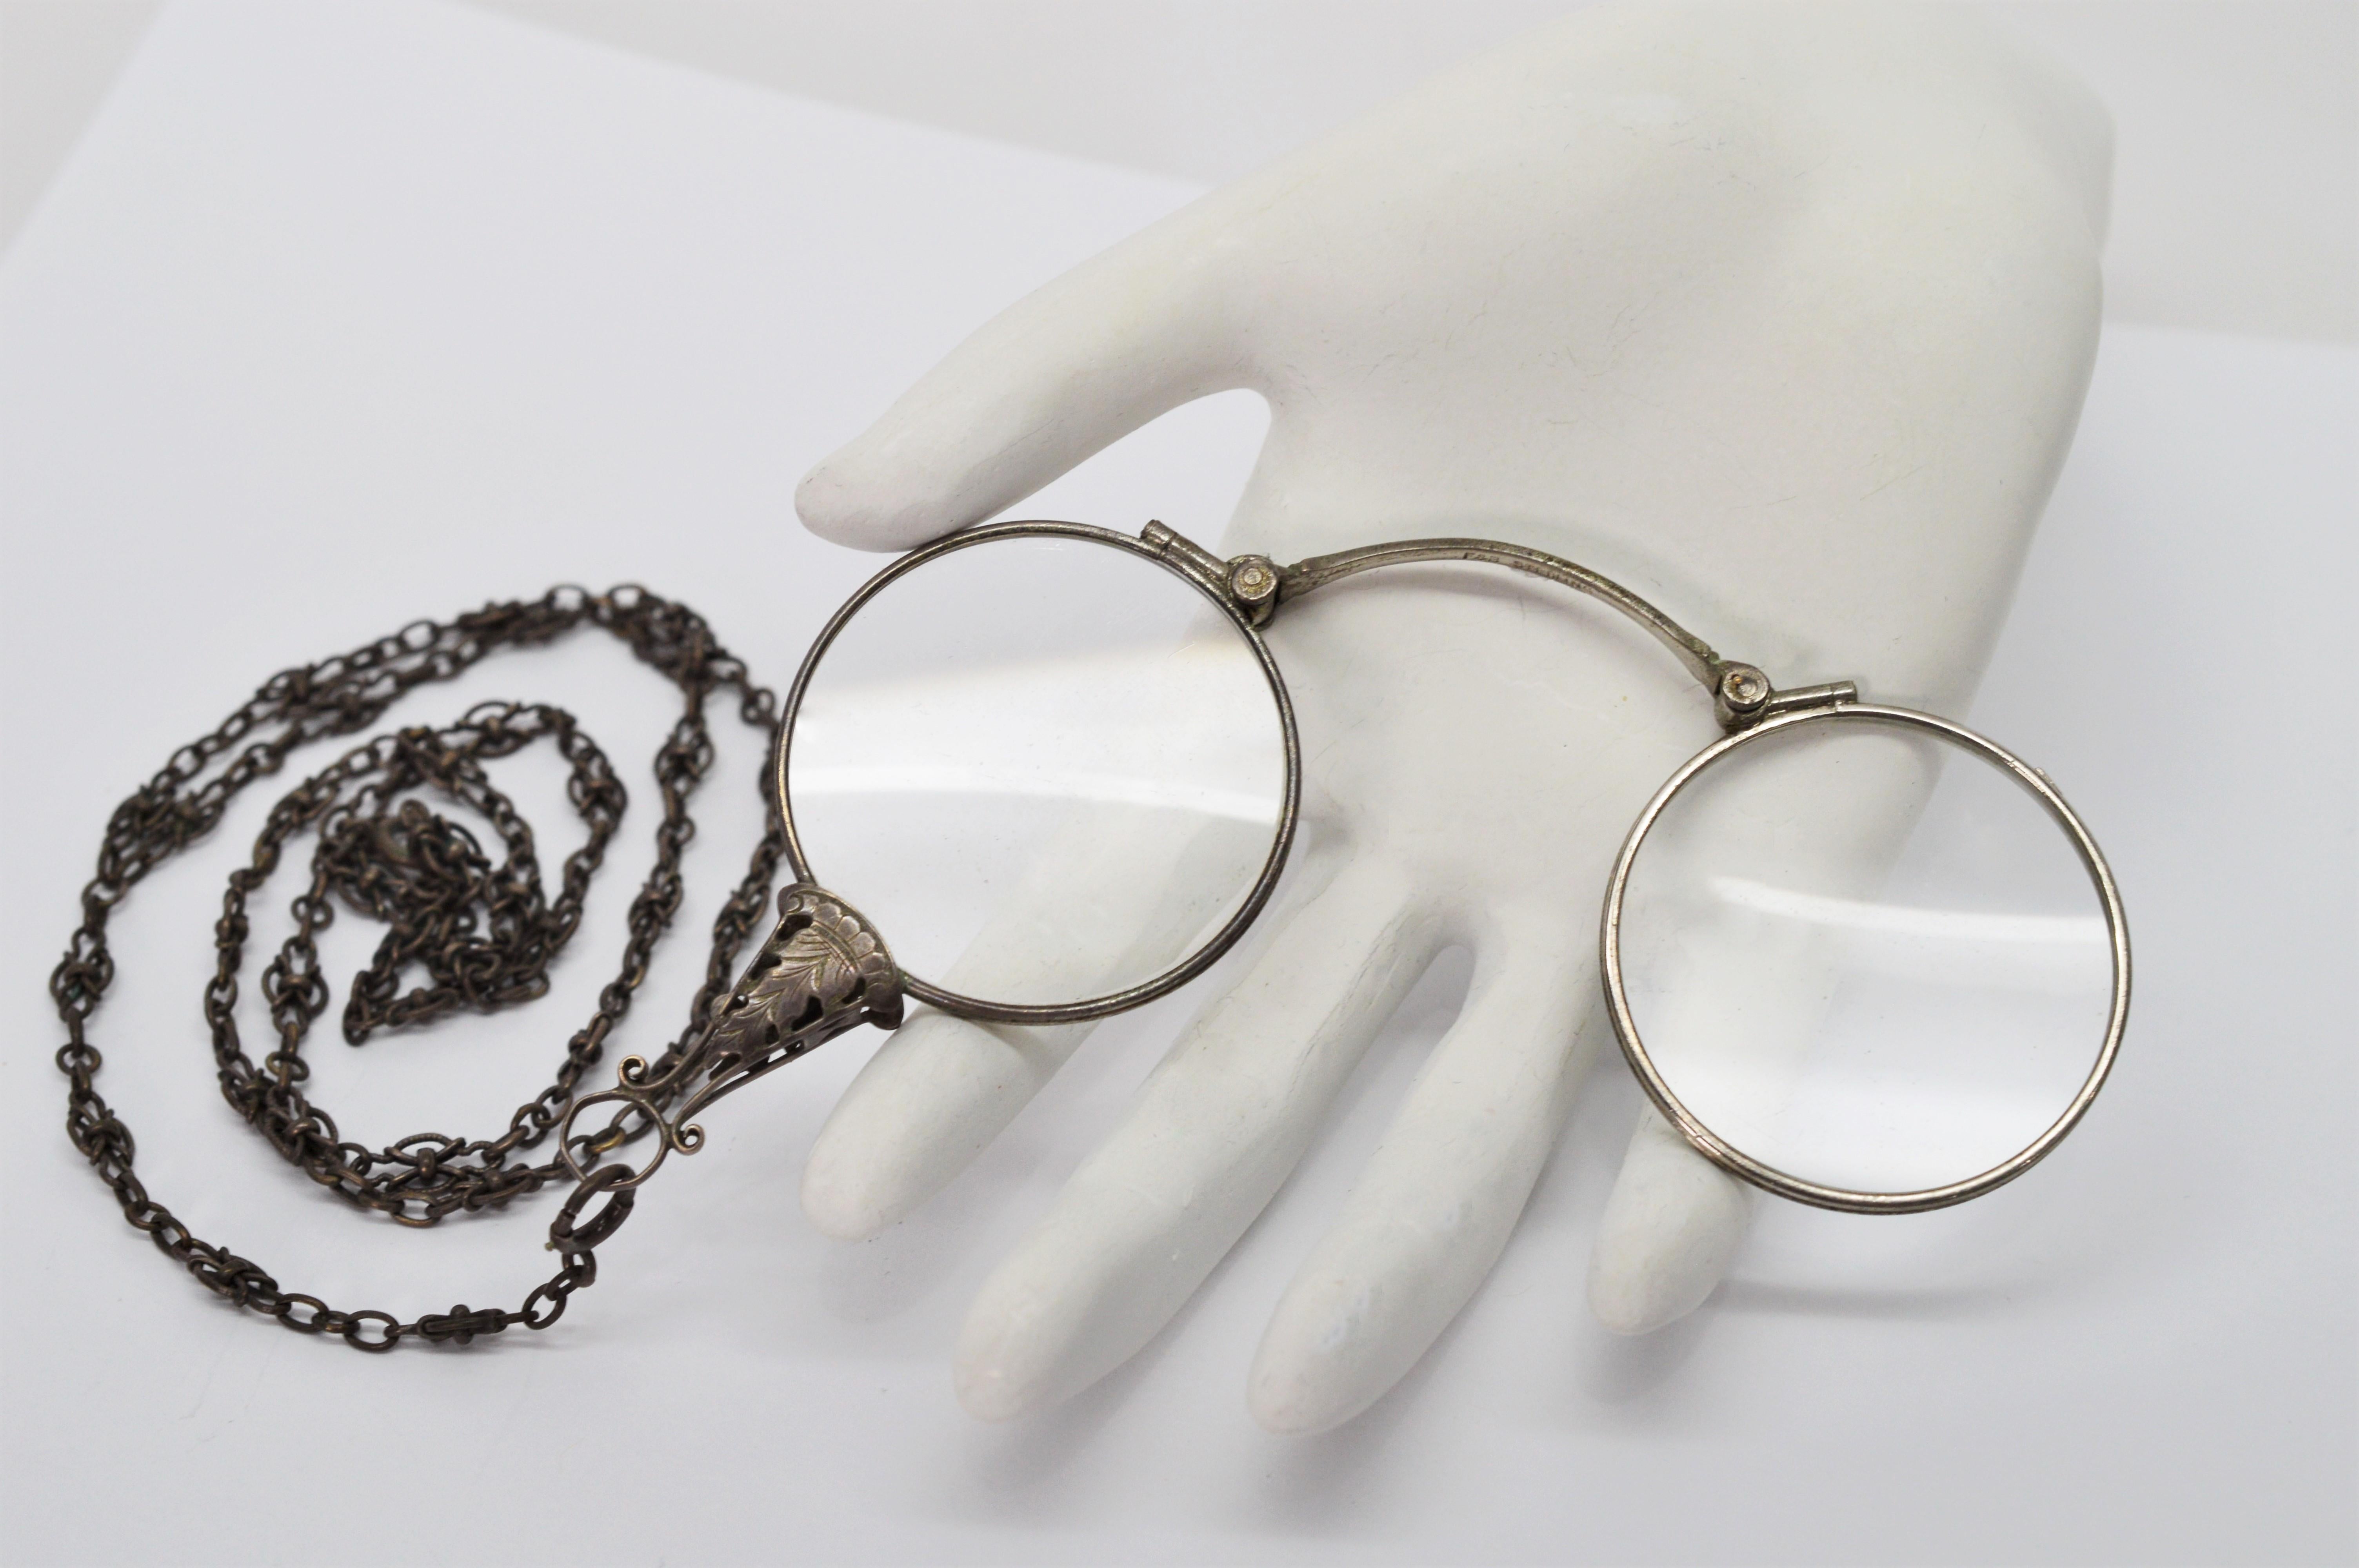 Antique Lorgnette Opera Glasses with sterling silver frames, chain and silver filigree stem with an engraved leaf design. The thirty inch chain is finished with a spring ring closure. This collectible piece has the original lenses measuring 1-3/8